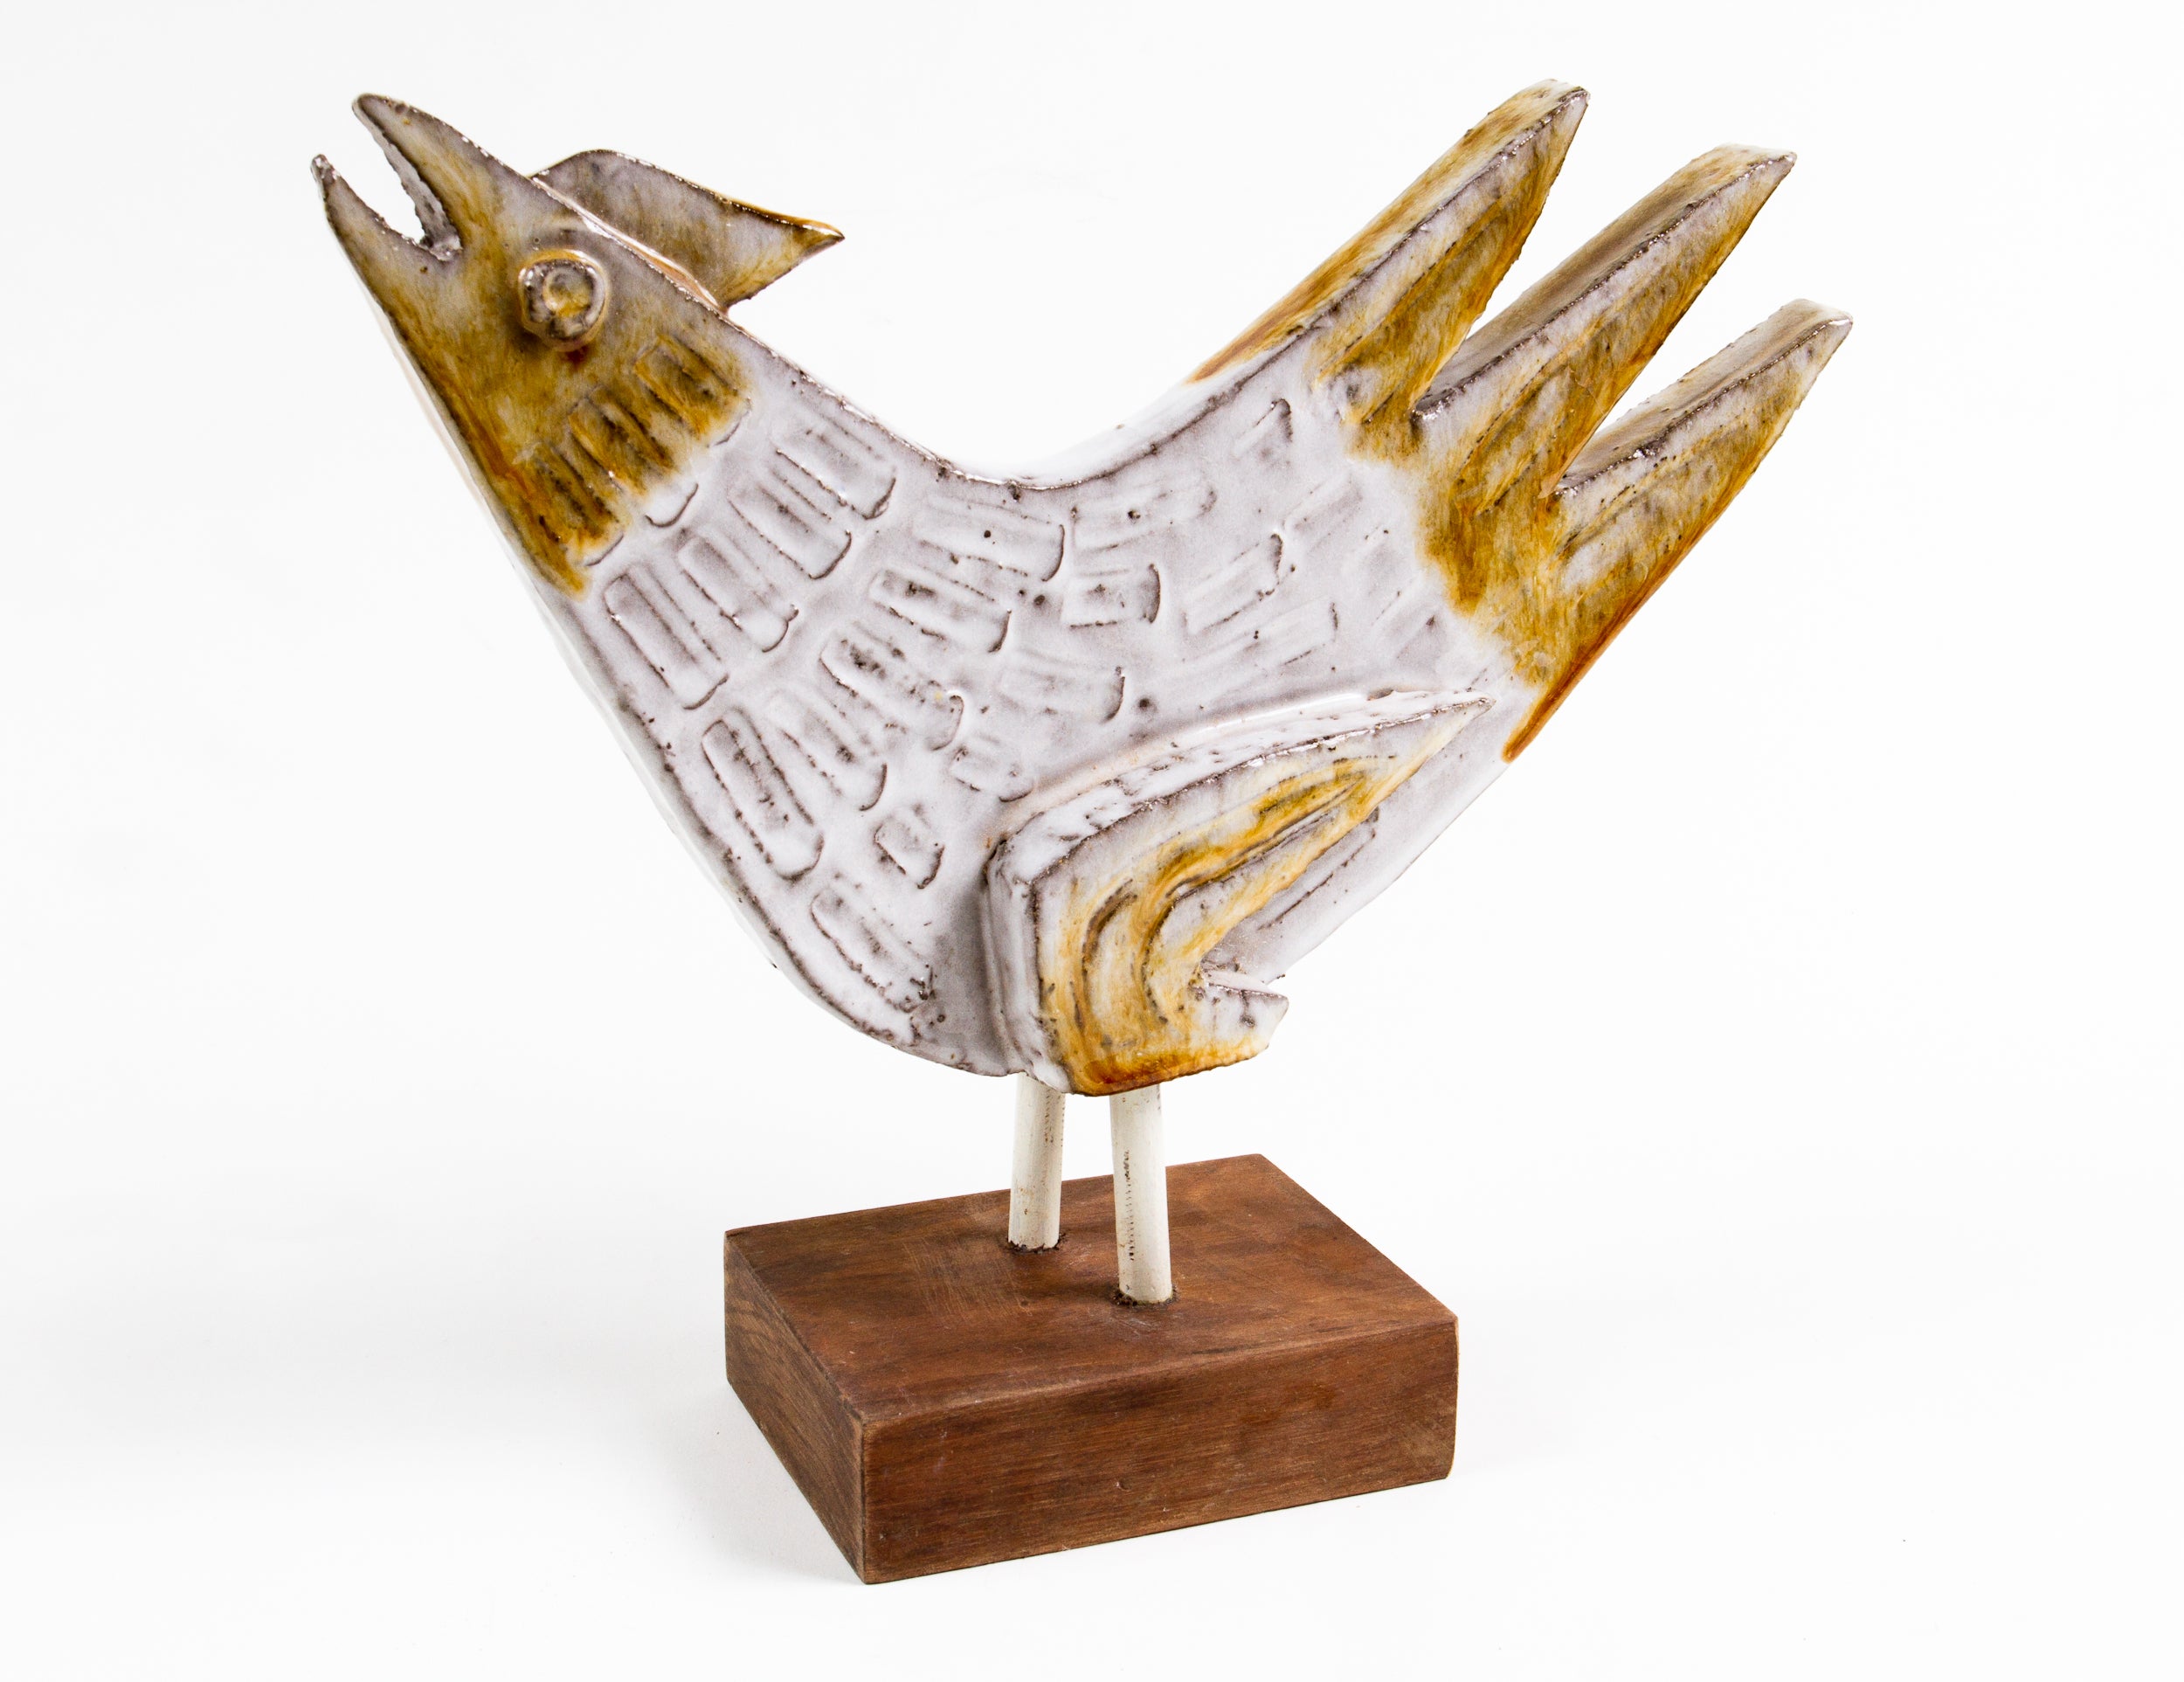 Glazed Ceramic Rooster by Charles Sucsan